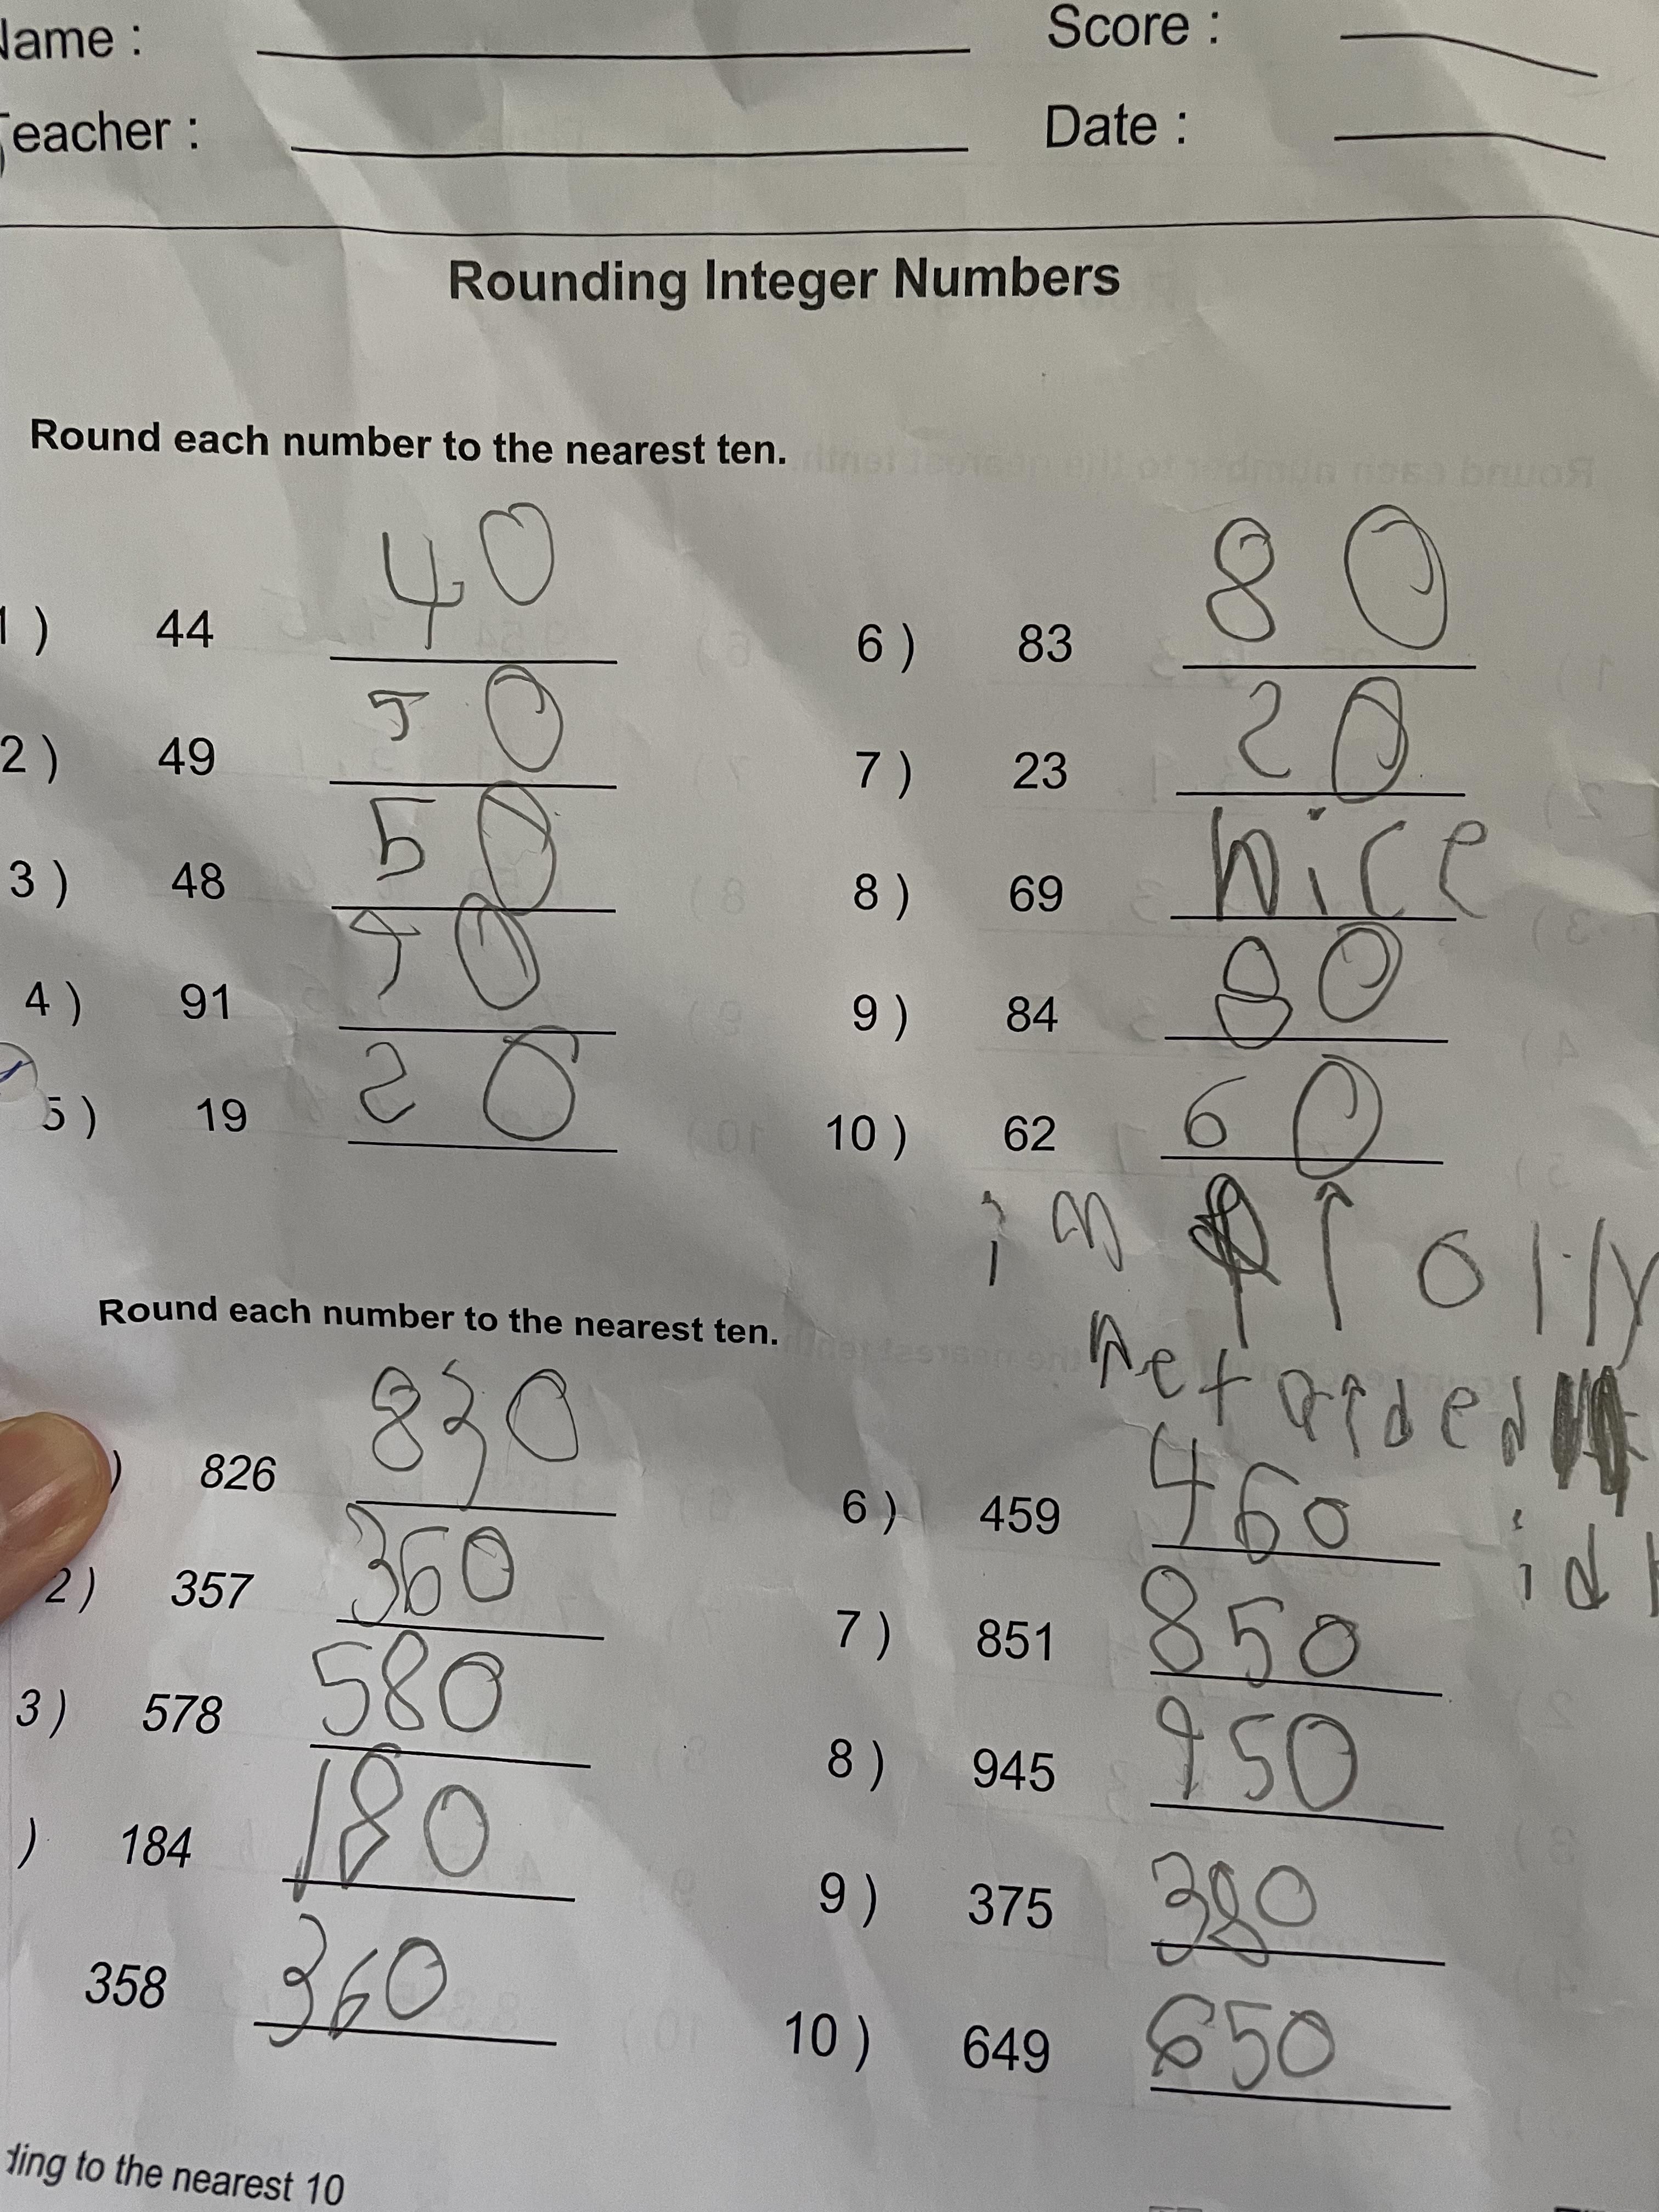 My son asked me to check his homework answers. I’m not even mad.